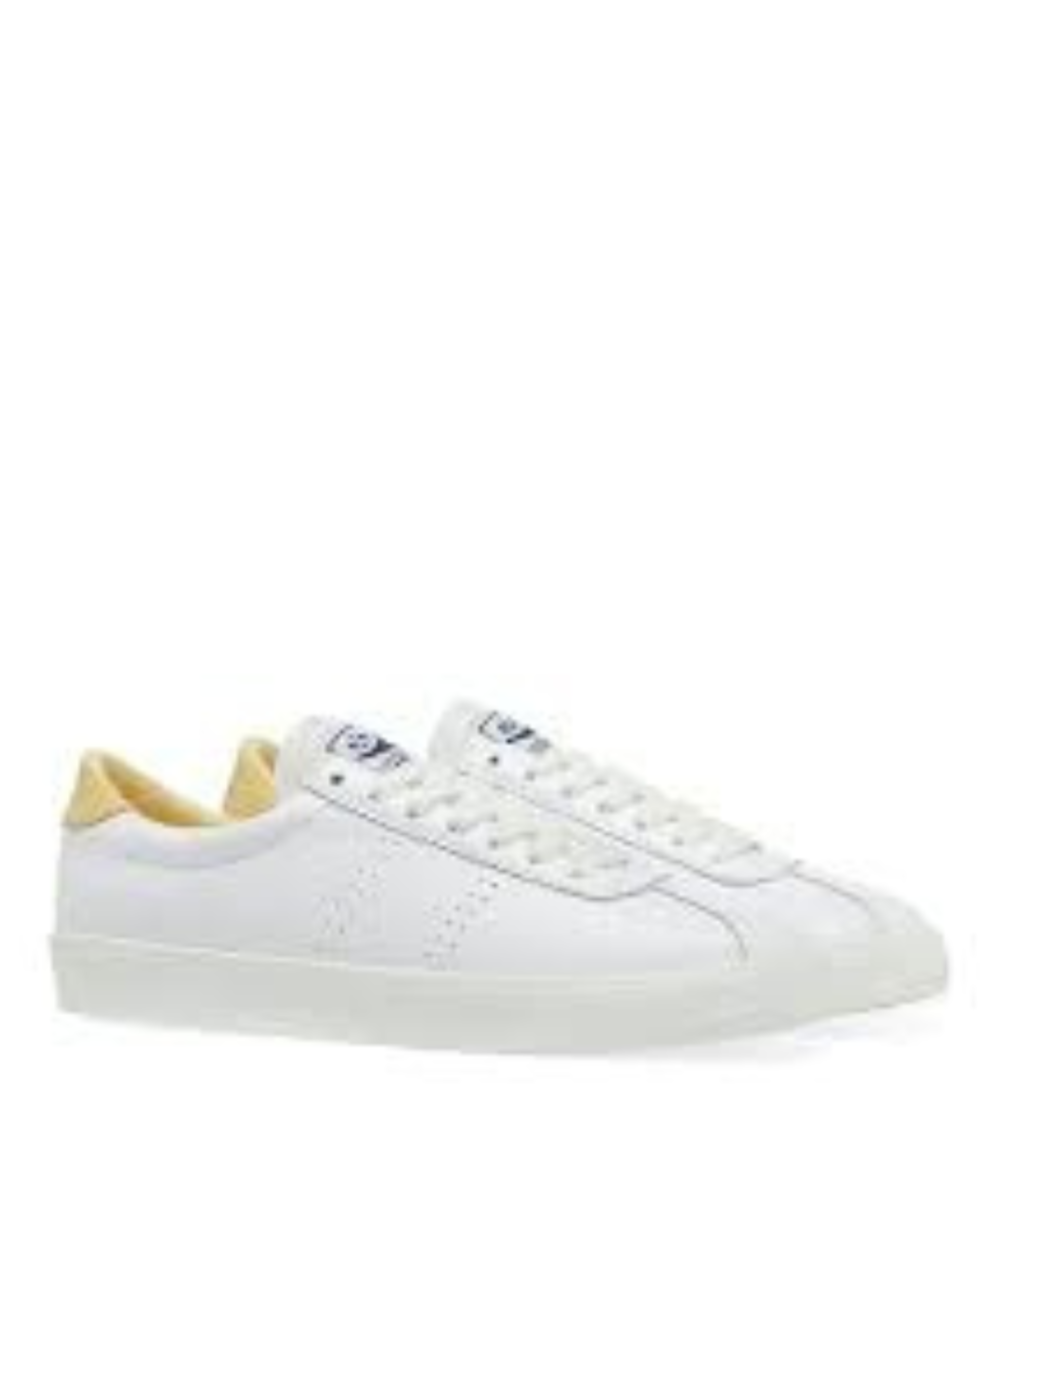 white leather casual sneakers 